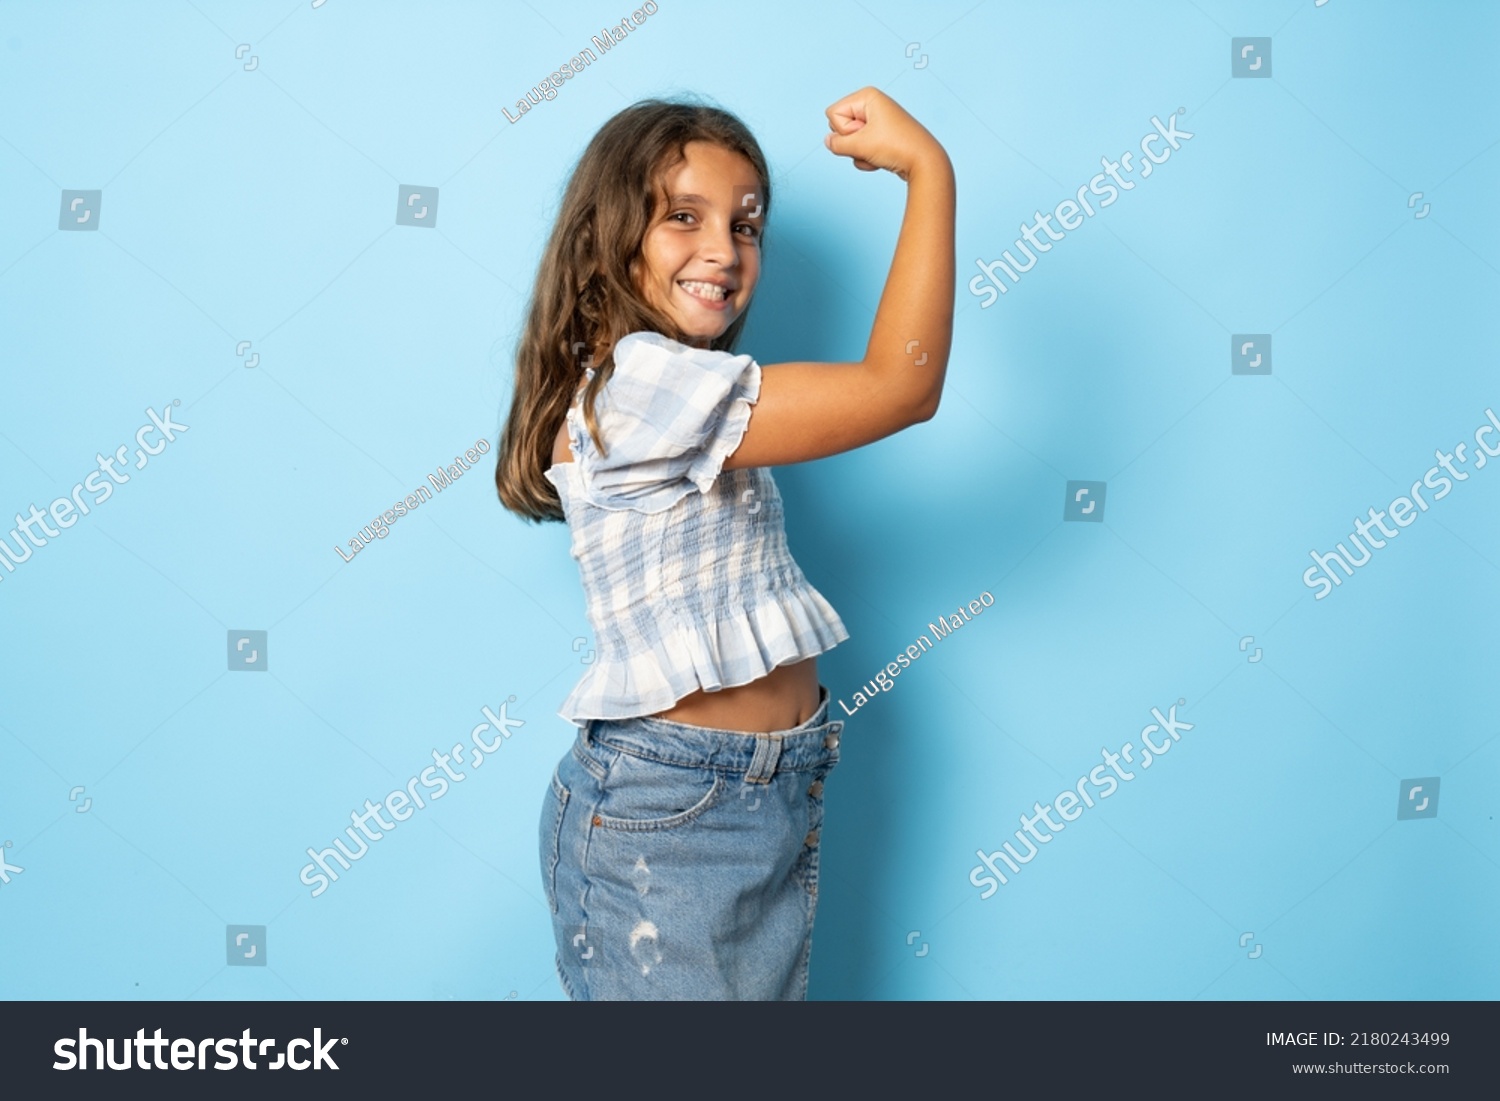 Smiling strong little brunette kid girl 10-11 years old showing biceps, muscles isolated on blue background children studio portrait. Childhood lifestyle concept. Mock up copy space. #2180243499